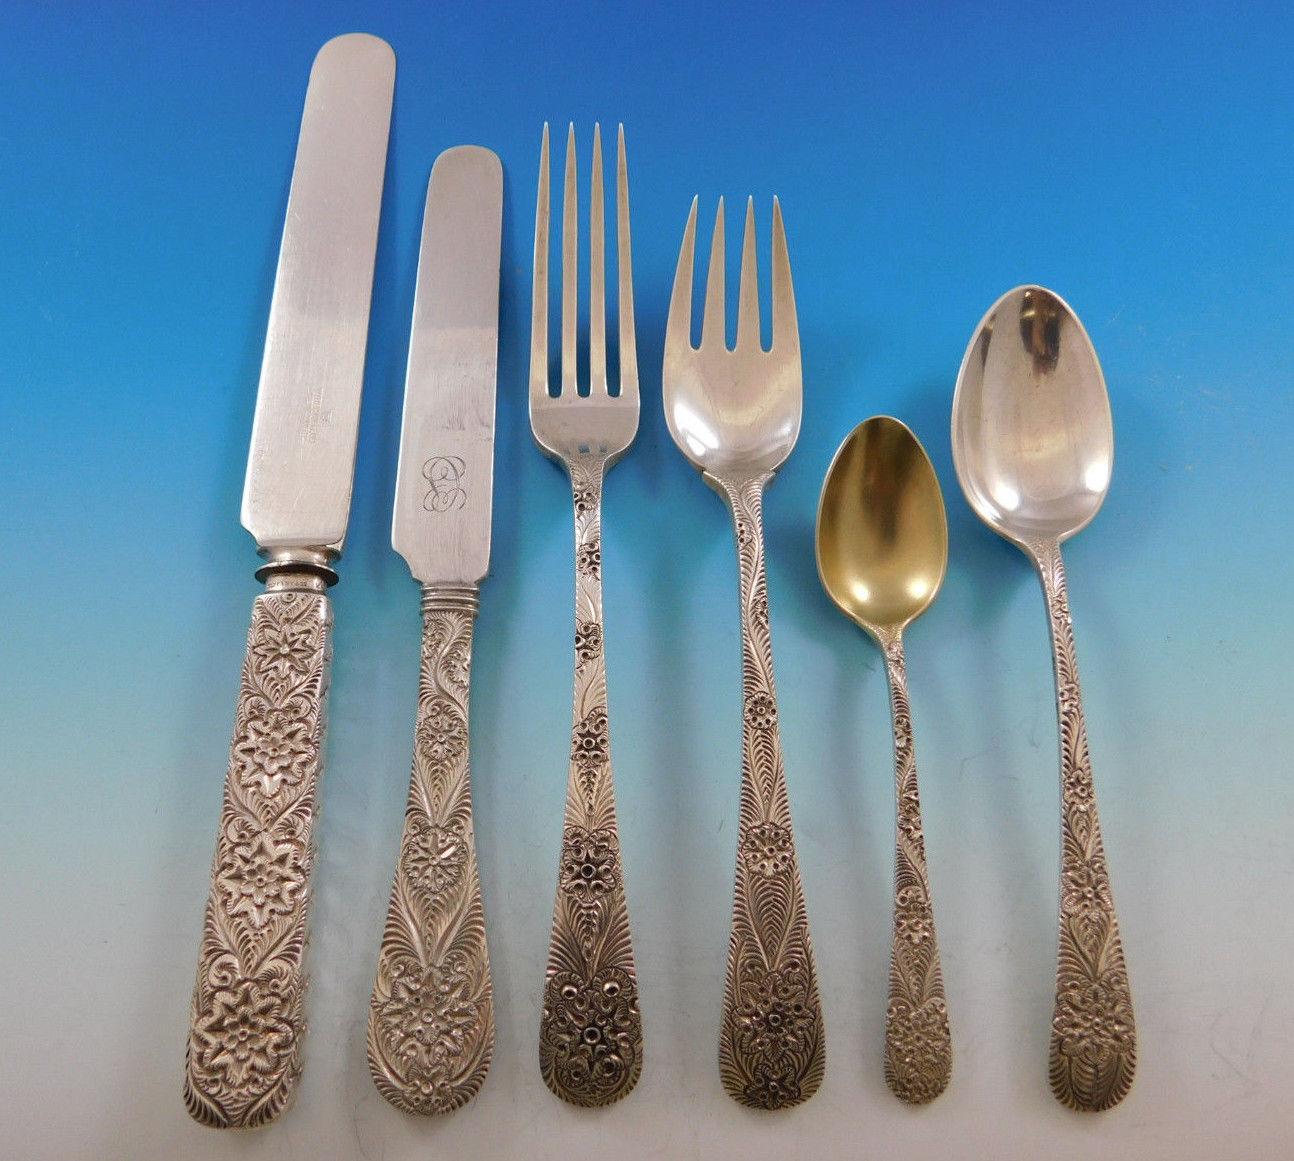 Exceedingly rare antique engraved aka custom engraved by Tiffany & Co. sterling silver flatware set with intricately hand engraved design, 80 pieces. This set includes:

12 knives, hollow handle with blunt blades, 9 3/8